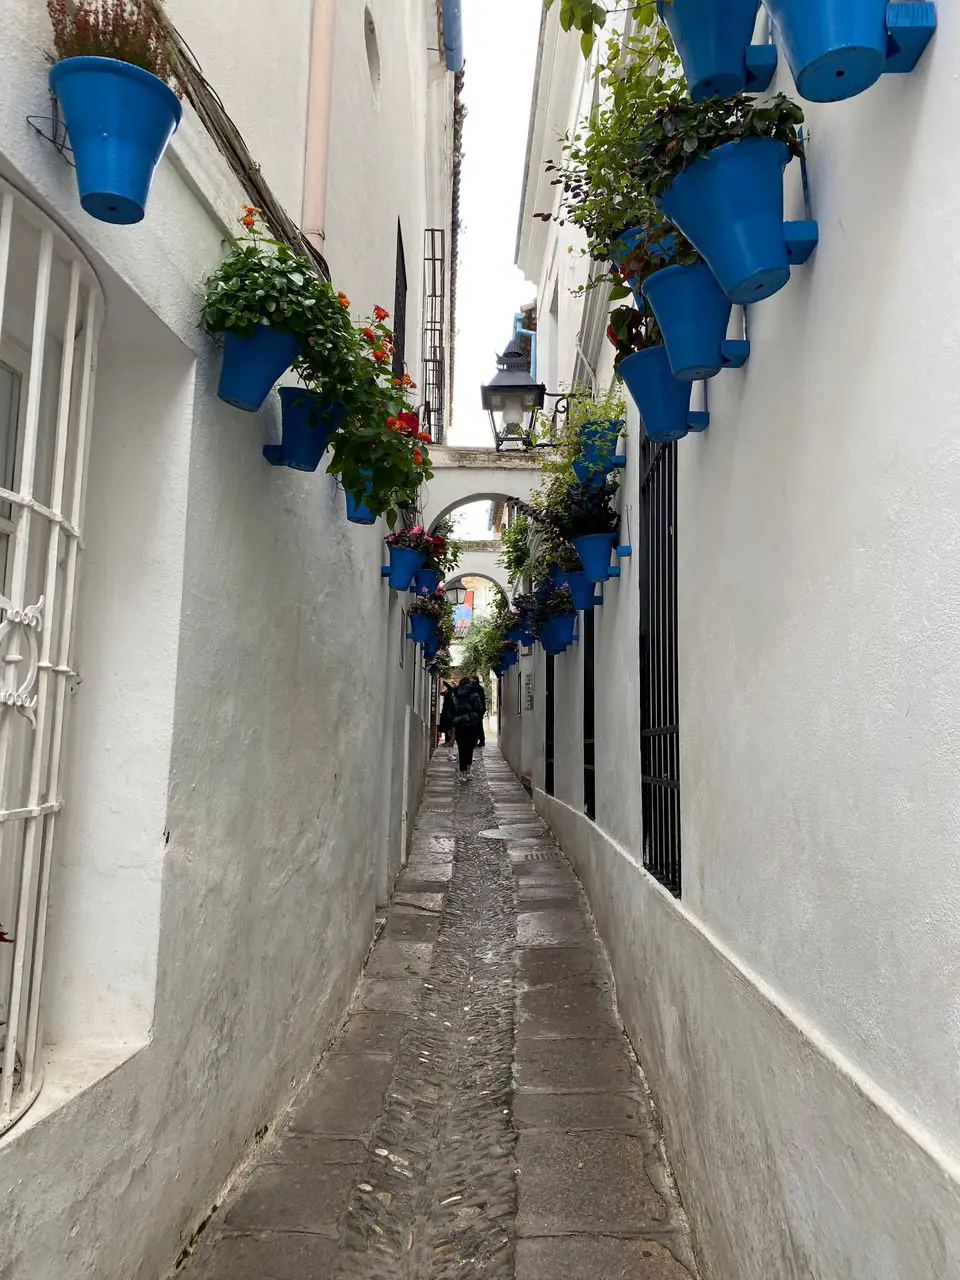 Blue buckets filled with flowers hanging from white walls at Calleja de las Flores, Cordoba.